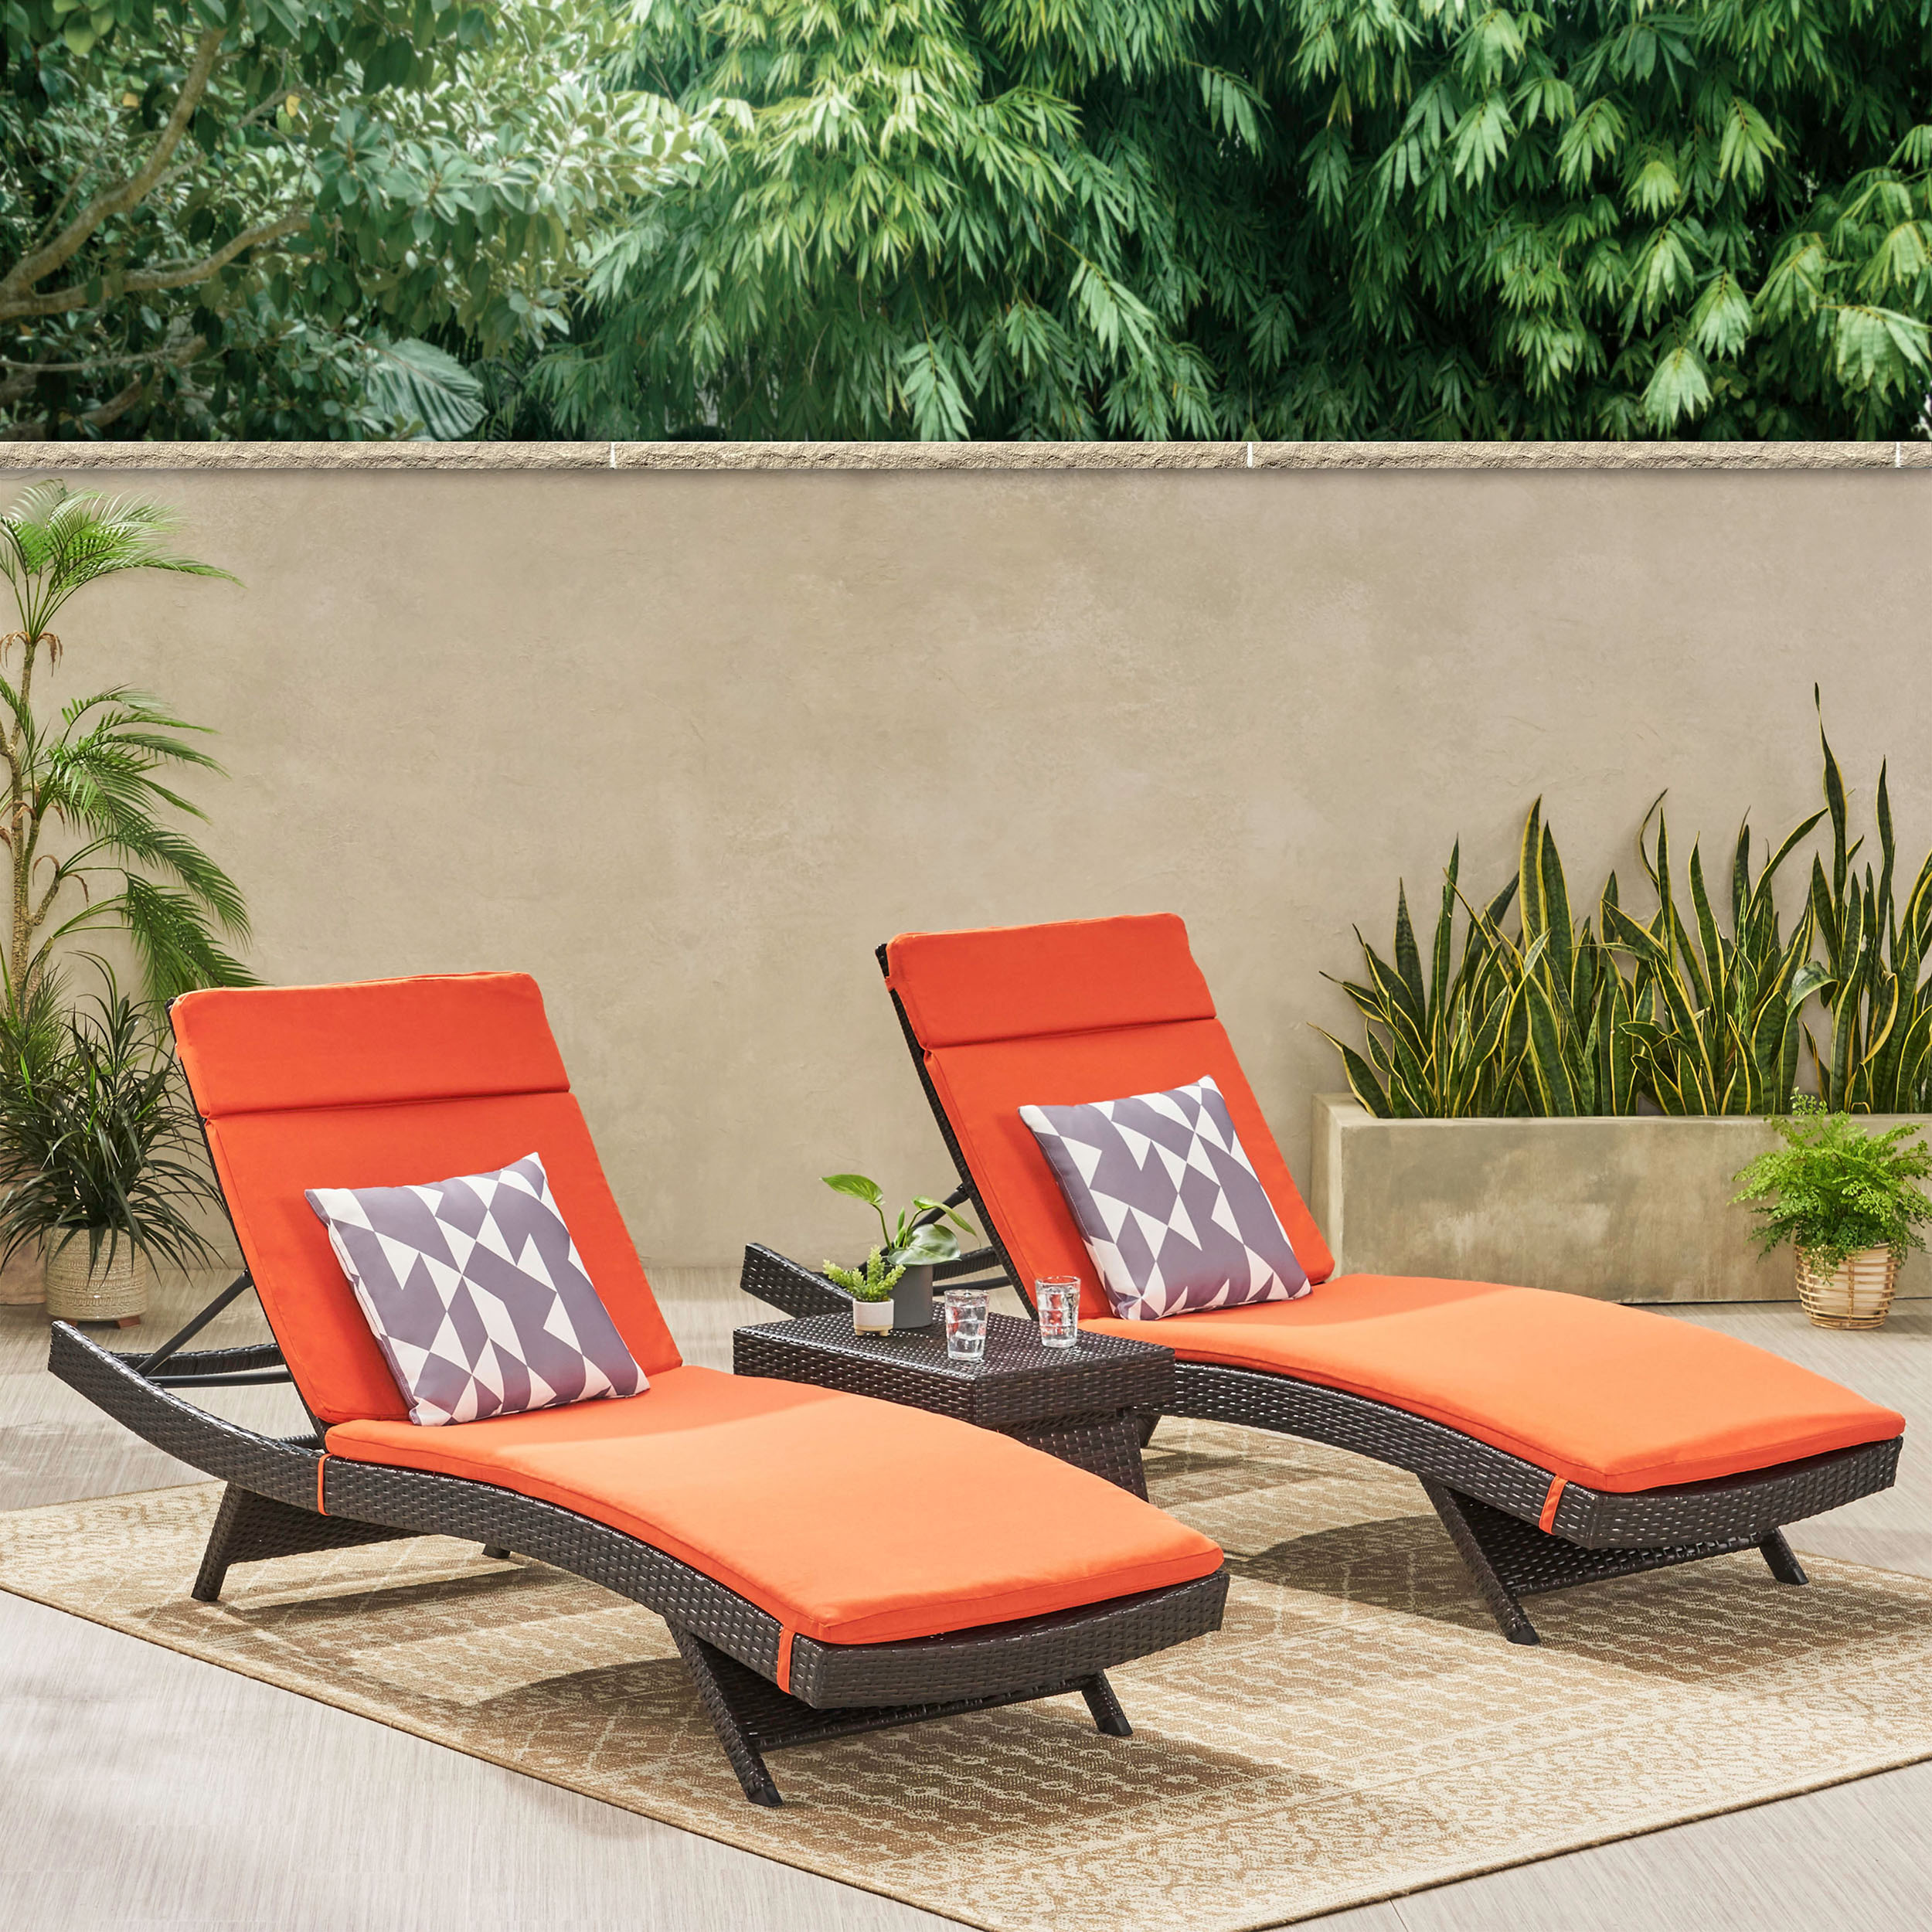 GDF Studio Olivia Outdoor Wicker 3 Piece Armless Adjustable Chaise Lounge Chat Set with Cushions, Multibrown and Orange - image 2 of 13